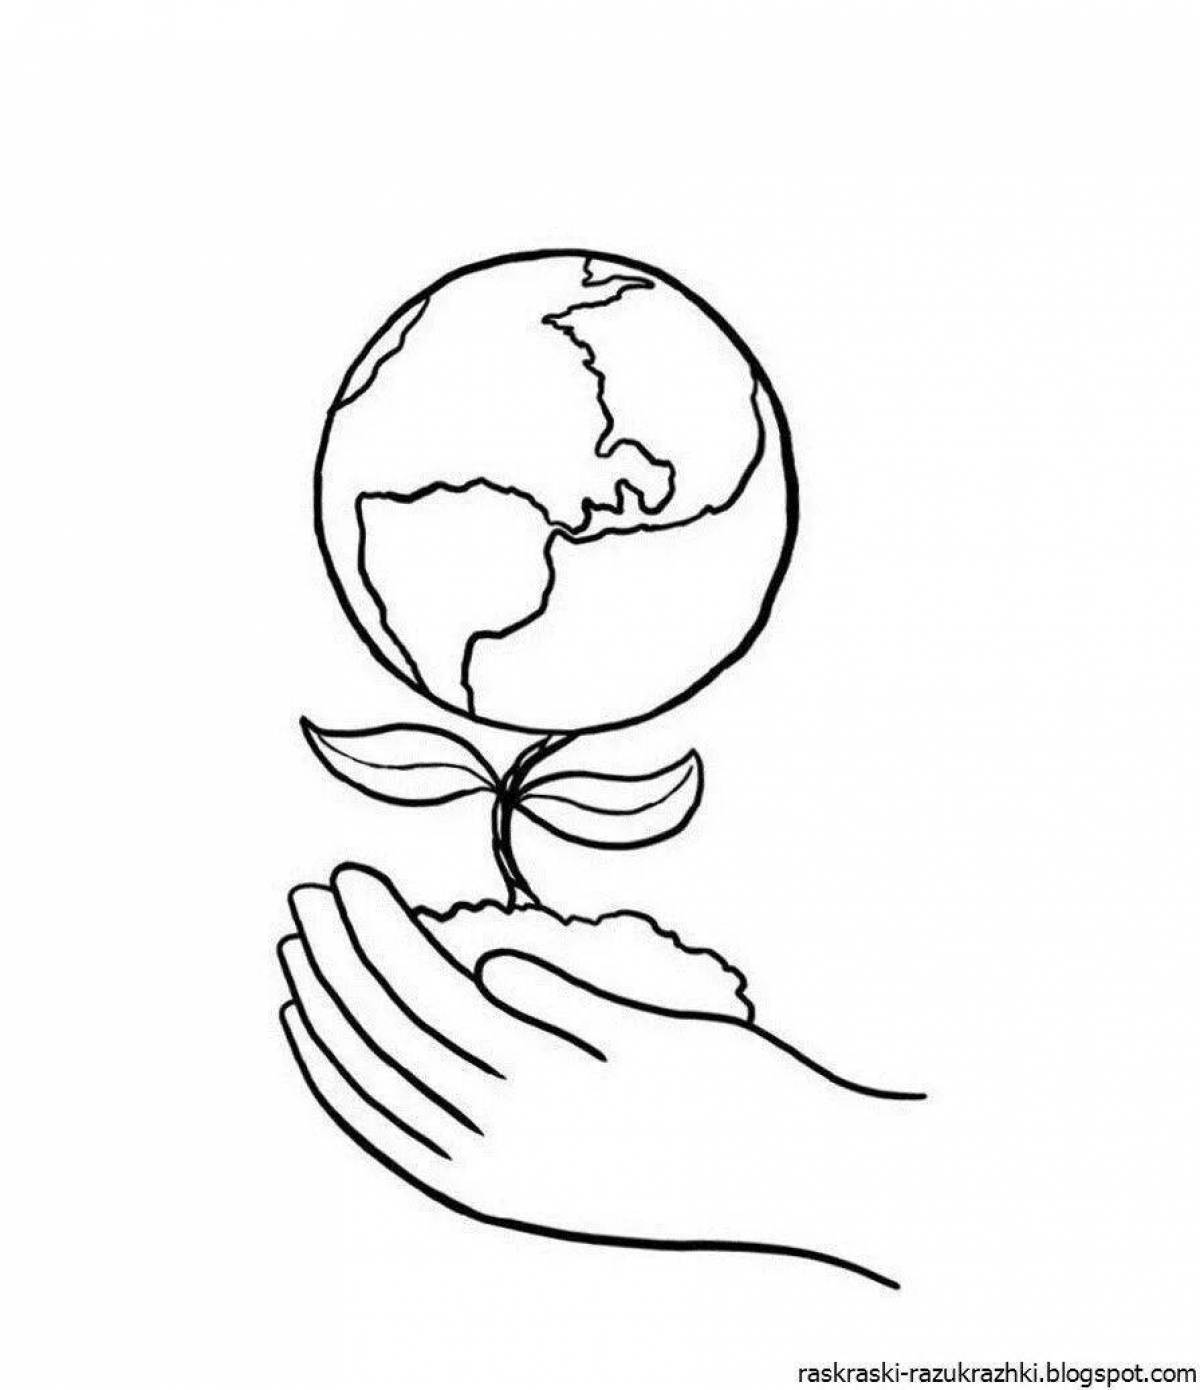 Colourfully designed planet earth coloring page